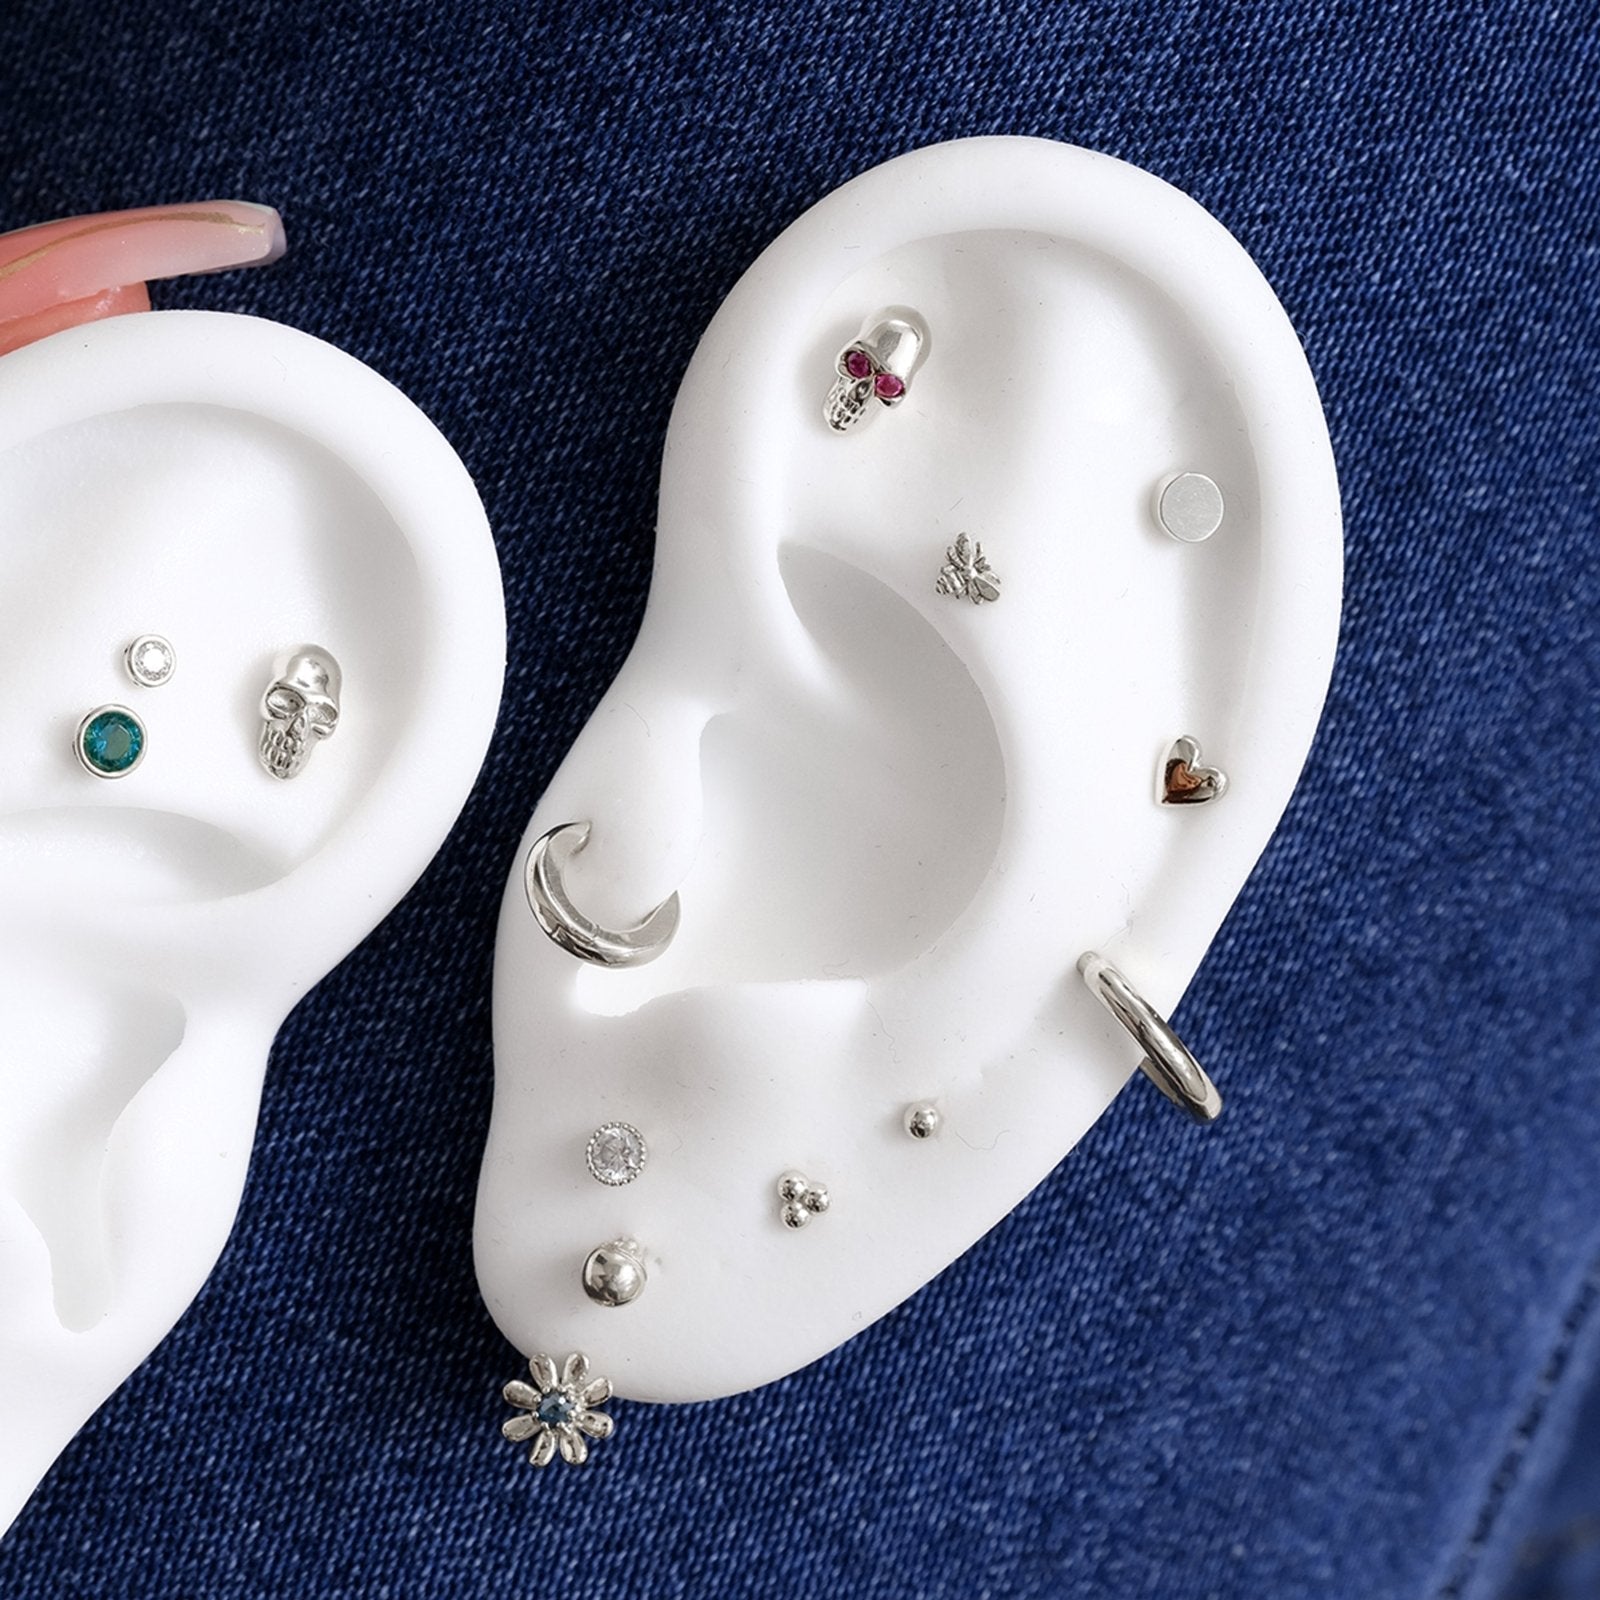 Trinity Beaded Cluster Flat Back Earring Earrings Estella Collection #product_description# 18153 14k Cartilage Earring Cartilage Earrings #tag4# #tag5# #tag6# #tag7# #tag8# #tag9# #tag10# 5MM